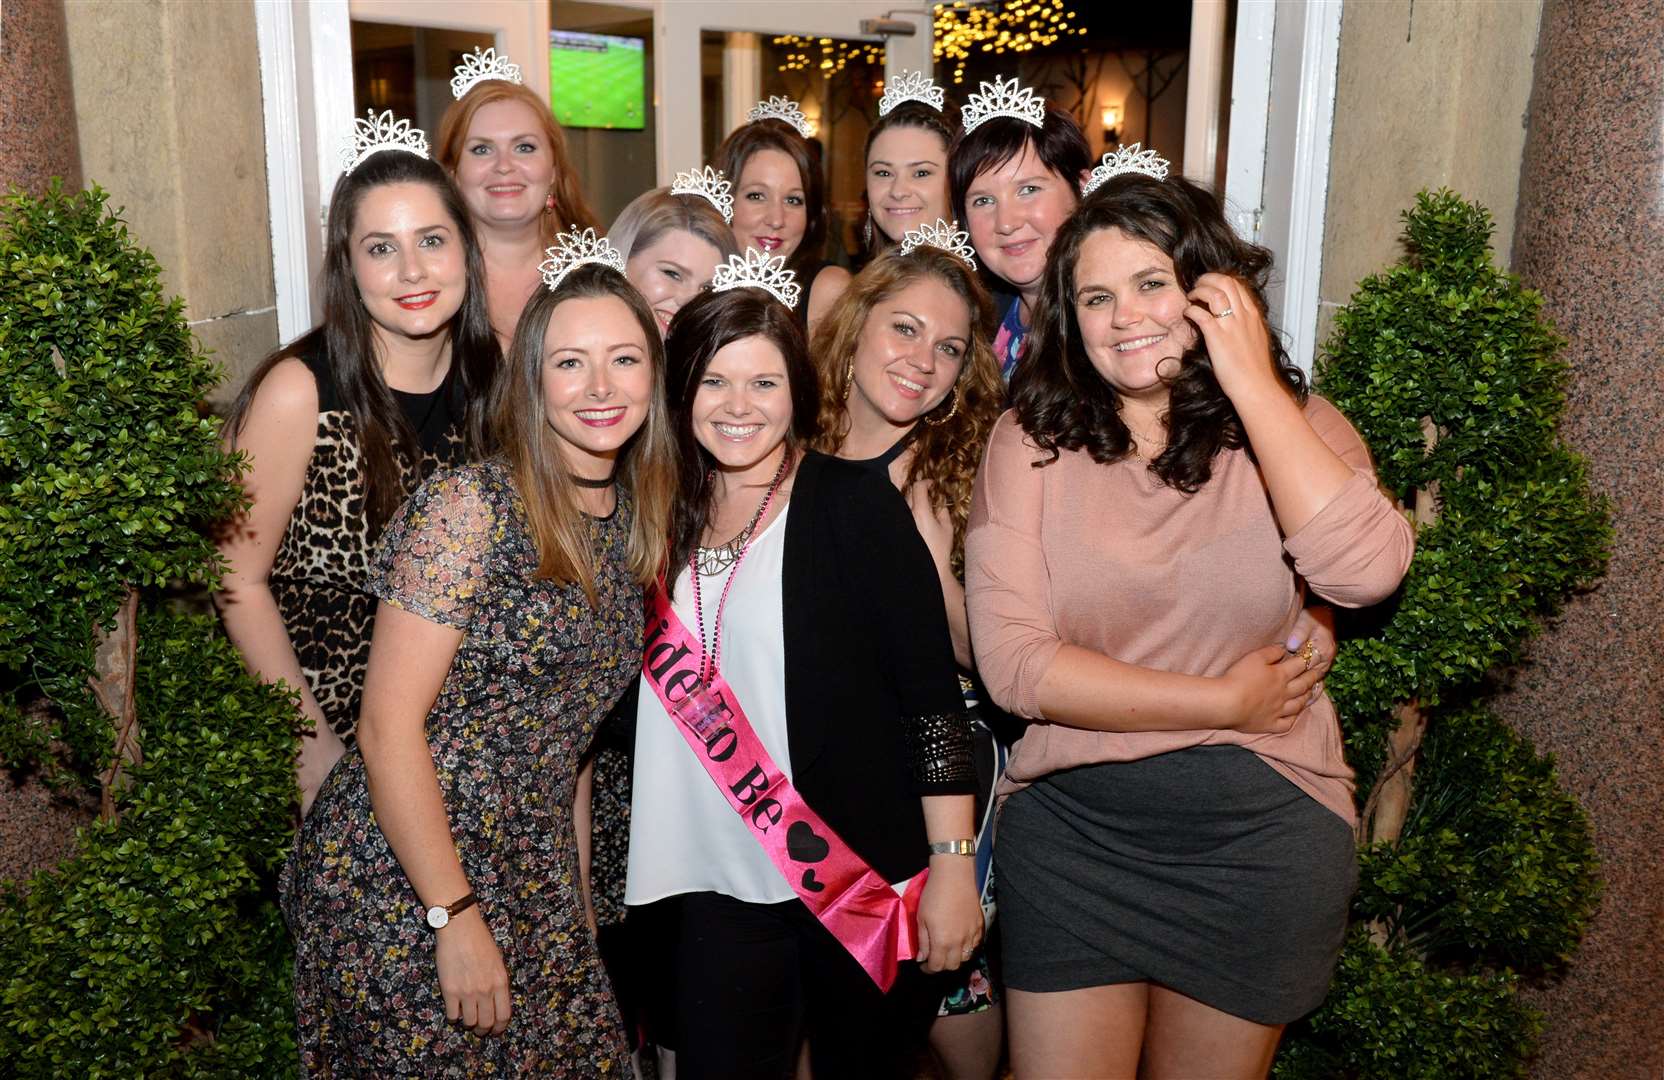 Kaleigh Watson (sash) from Nairn at the White House on her hen night. Picture: Gary Anthony. Image No.034610.